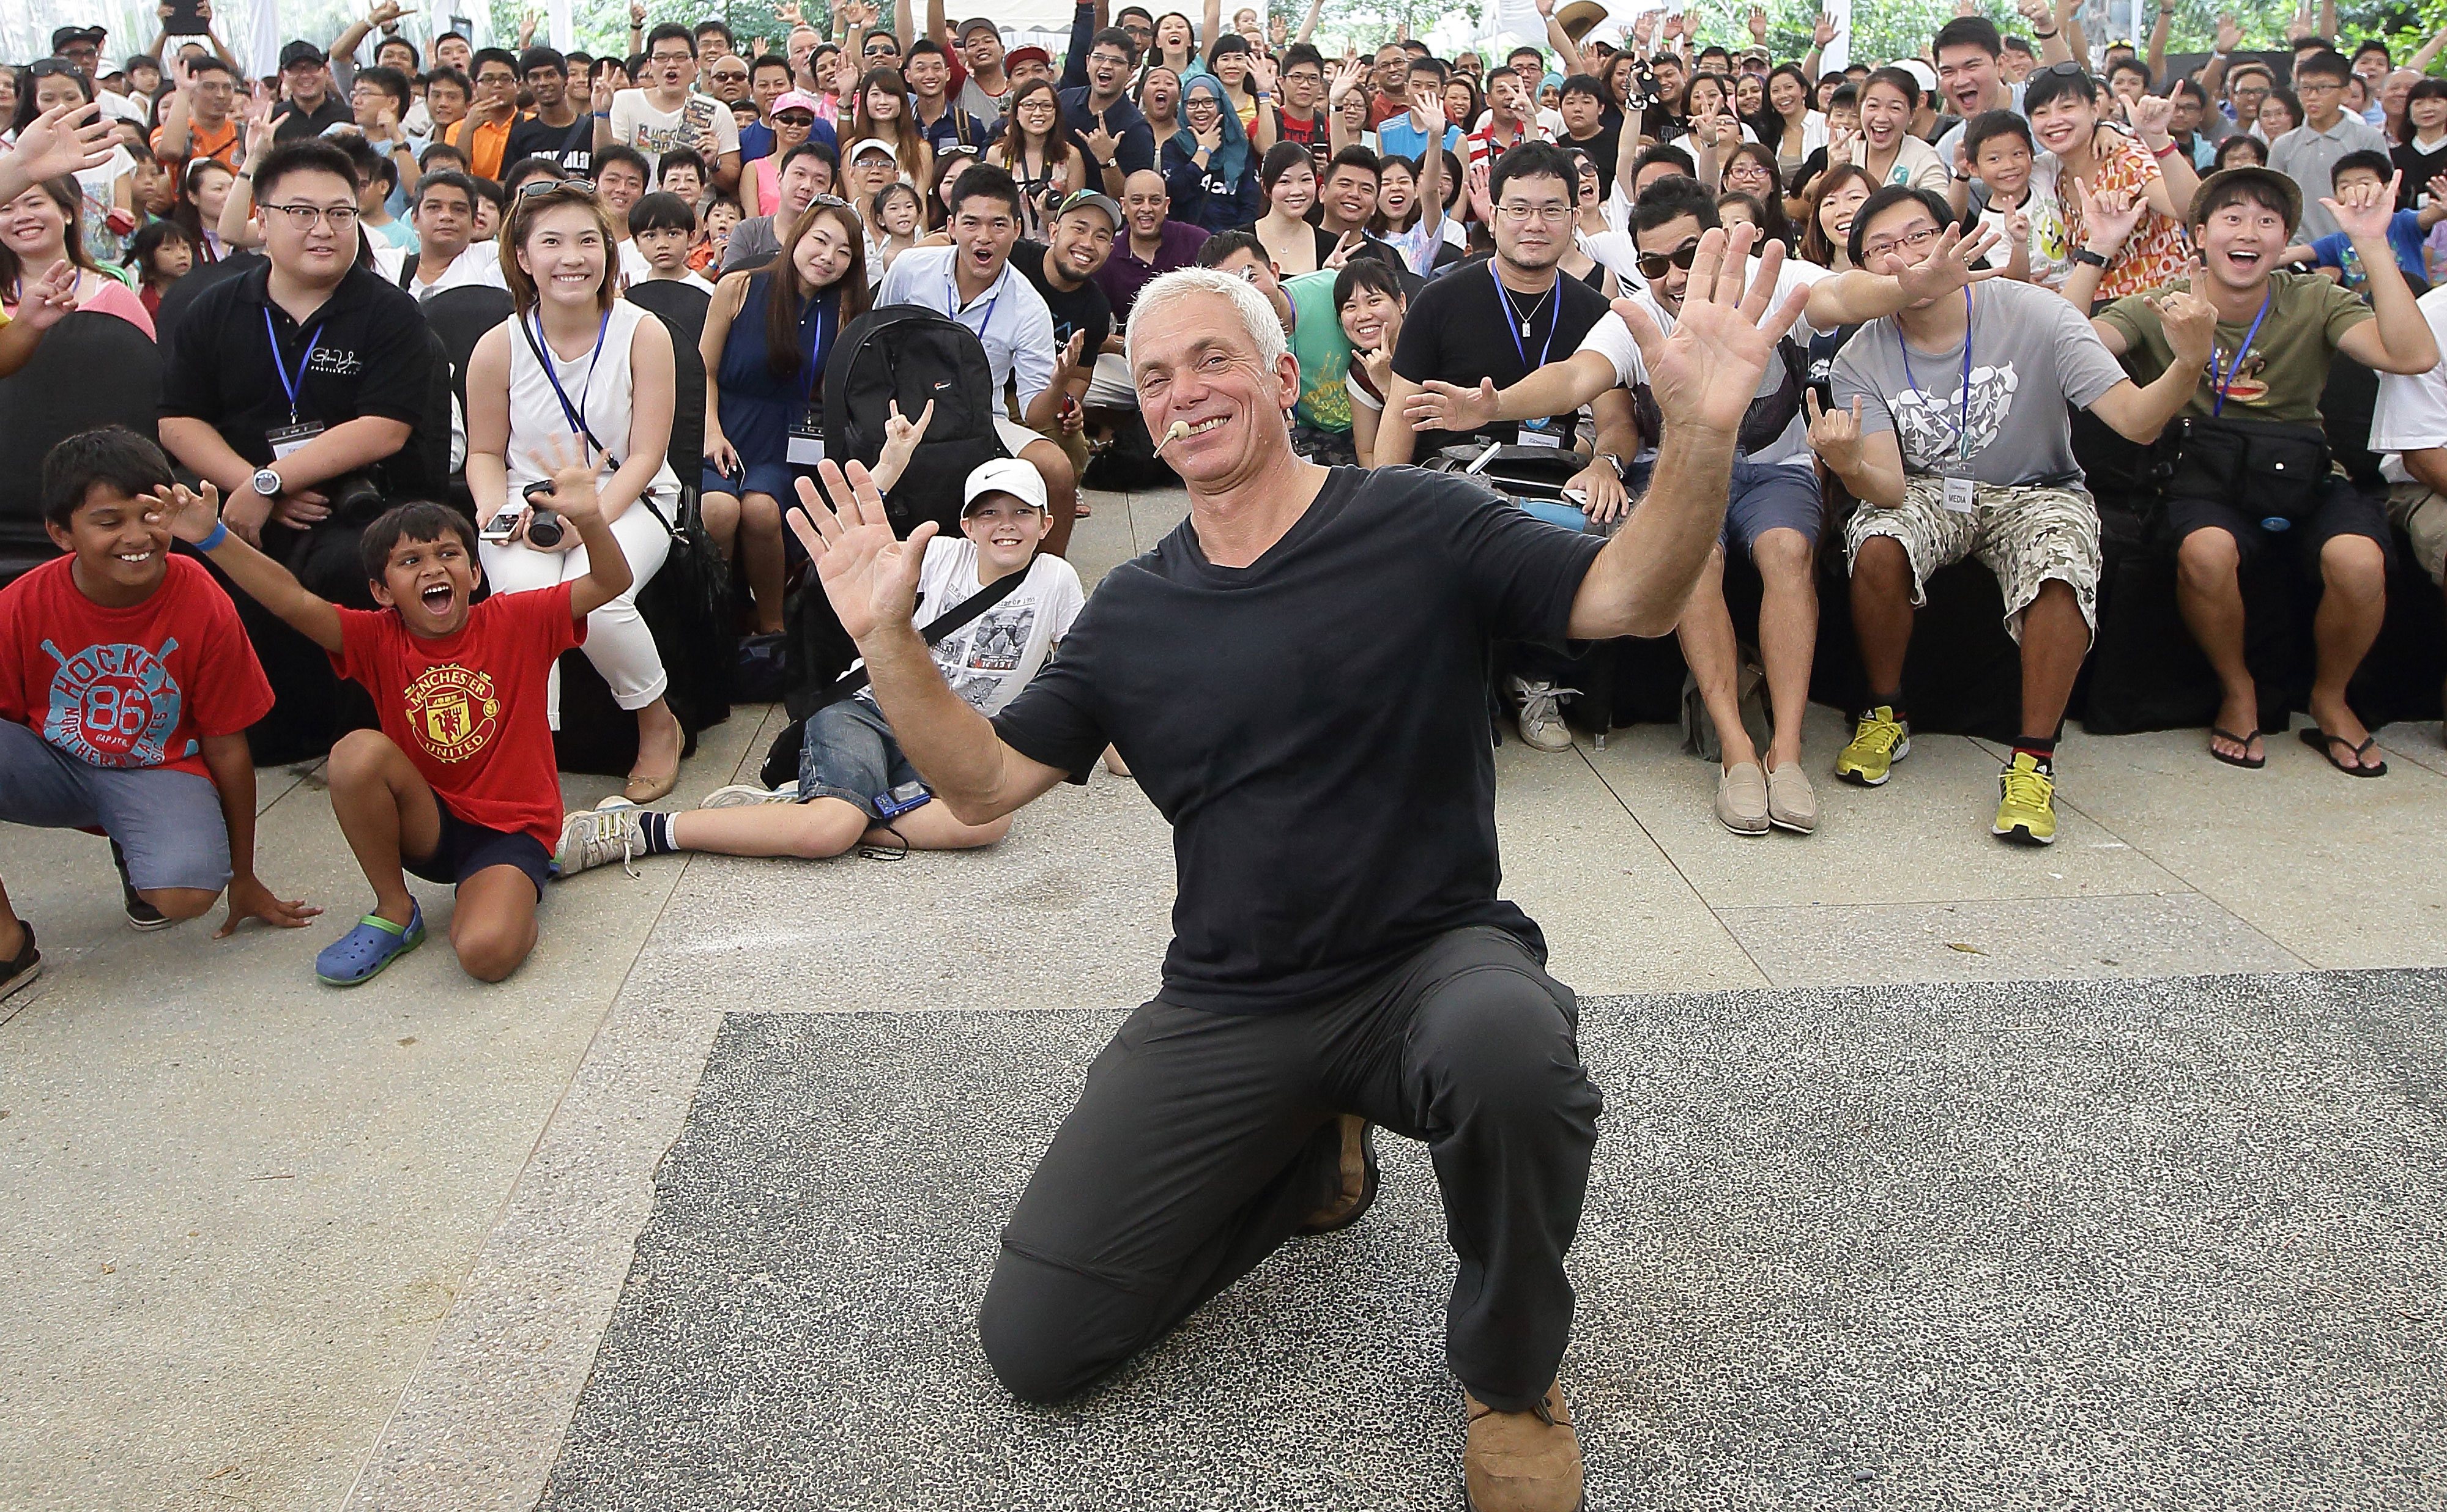 Jeremy Wade poses for a picture next to his fans.